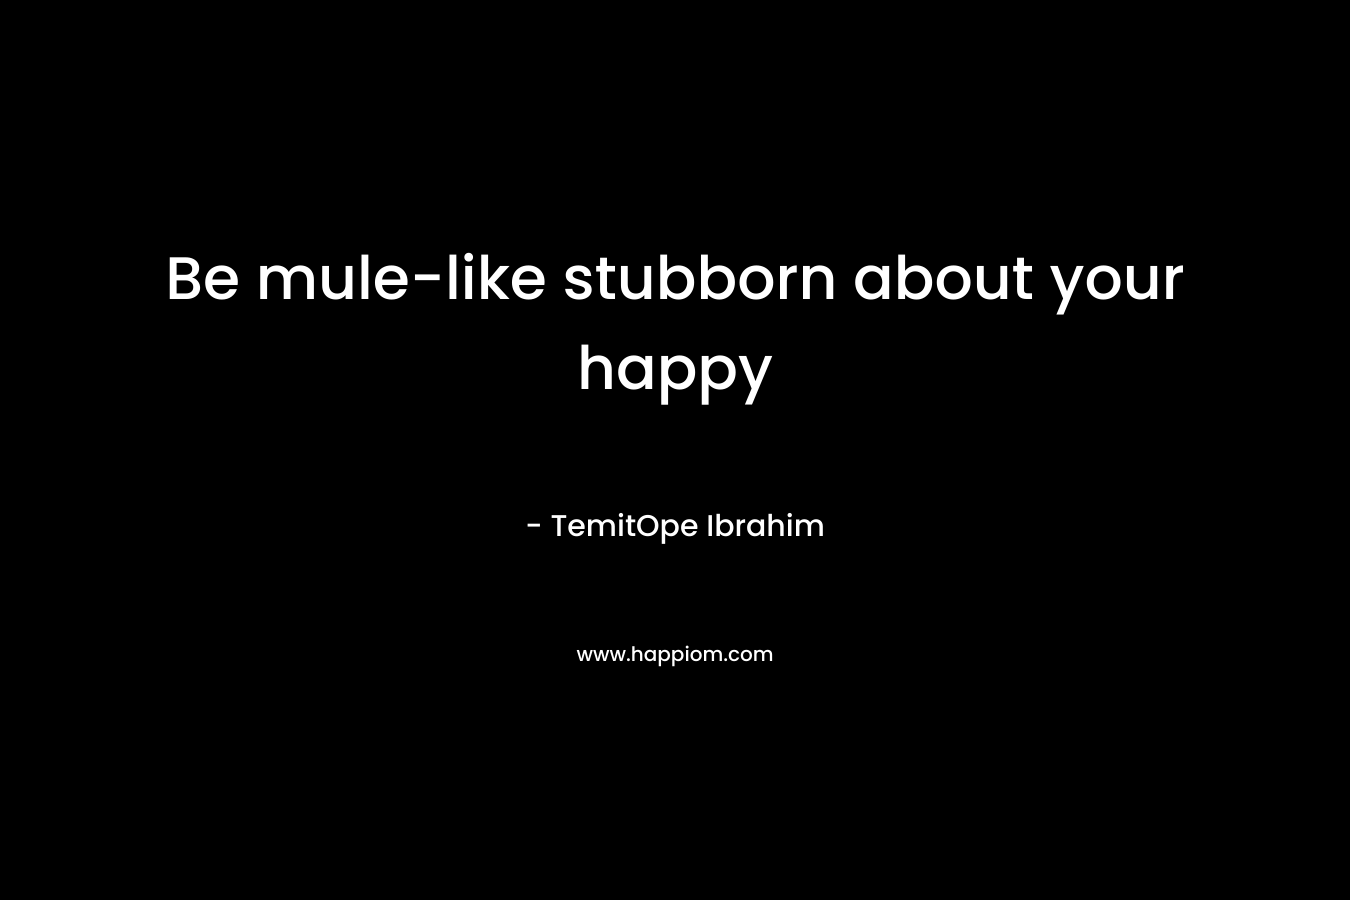 Be mule-like stubborn about your happy